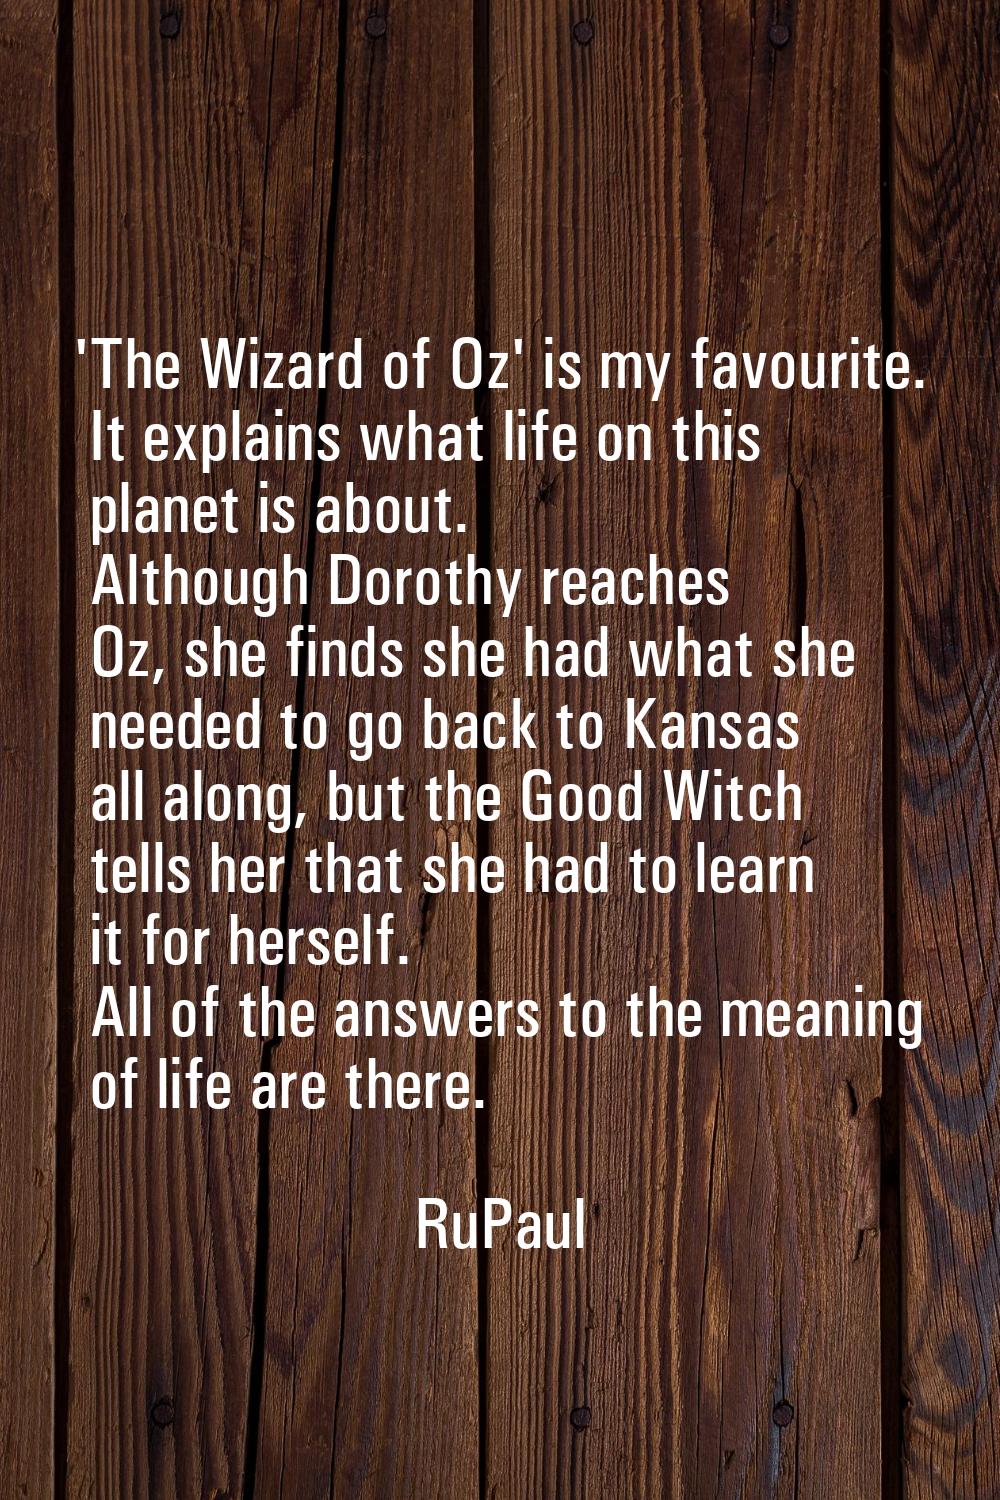 'The Wizard of Oz' is my favourite. It explains what life on this planet is about. Although Dorothy